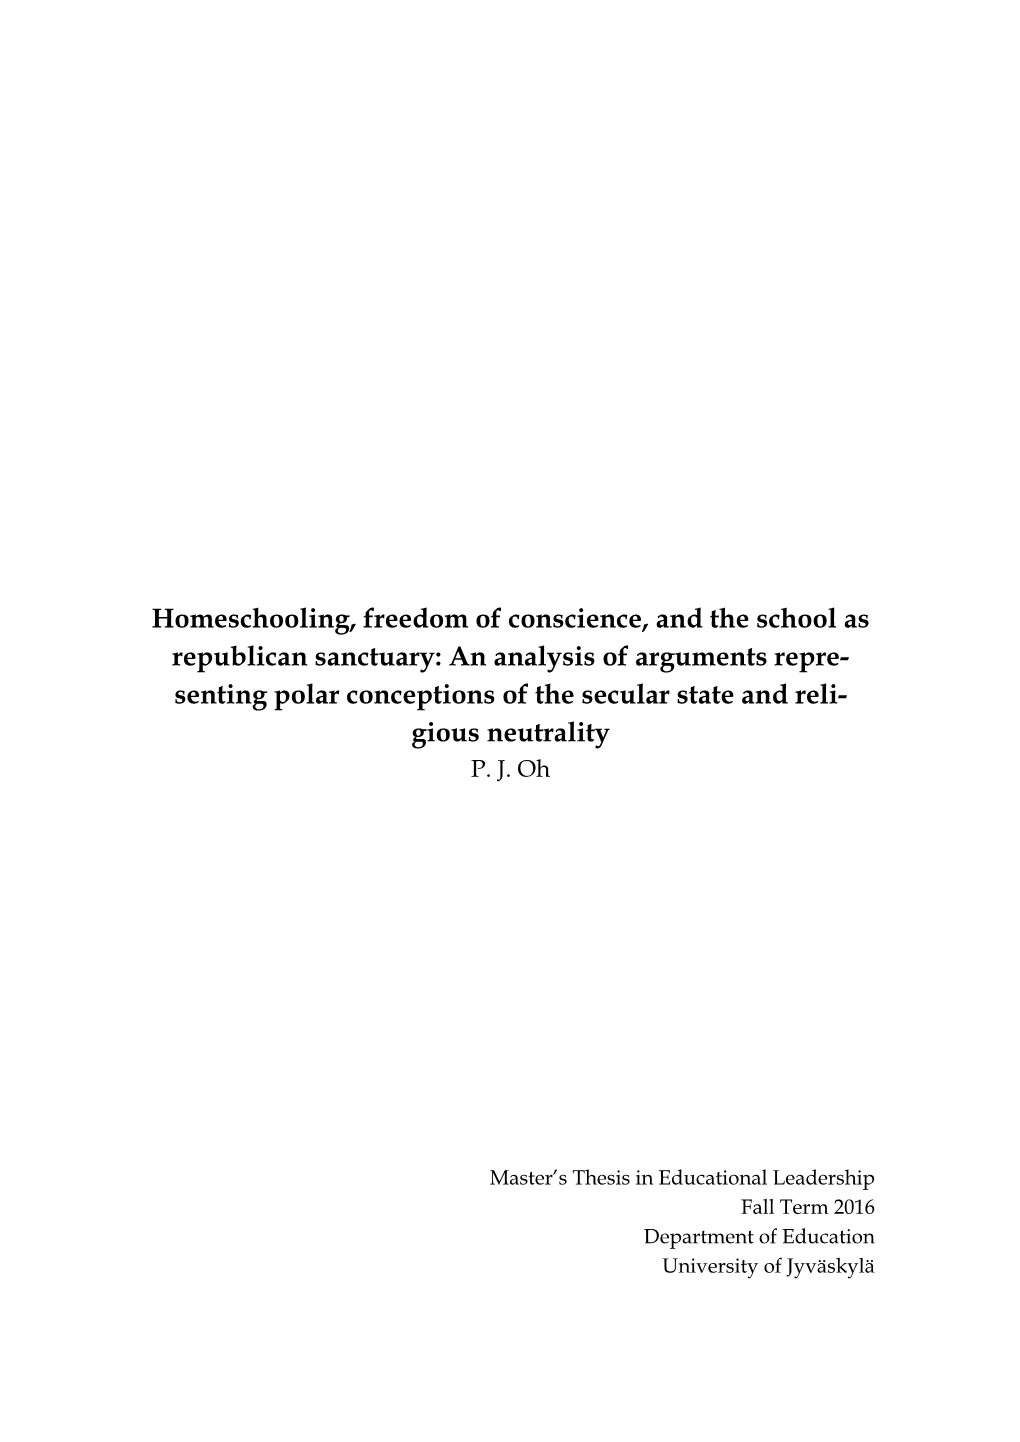 Homeschooling, Freedom of Conscience, and the School As Republican Sanctuary: an Analysis of Arguments Repre- Senting Polar Conc